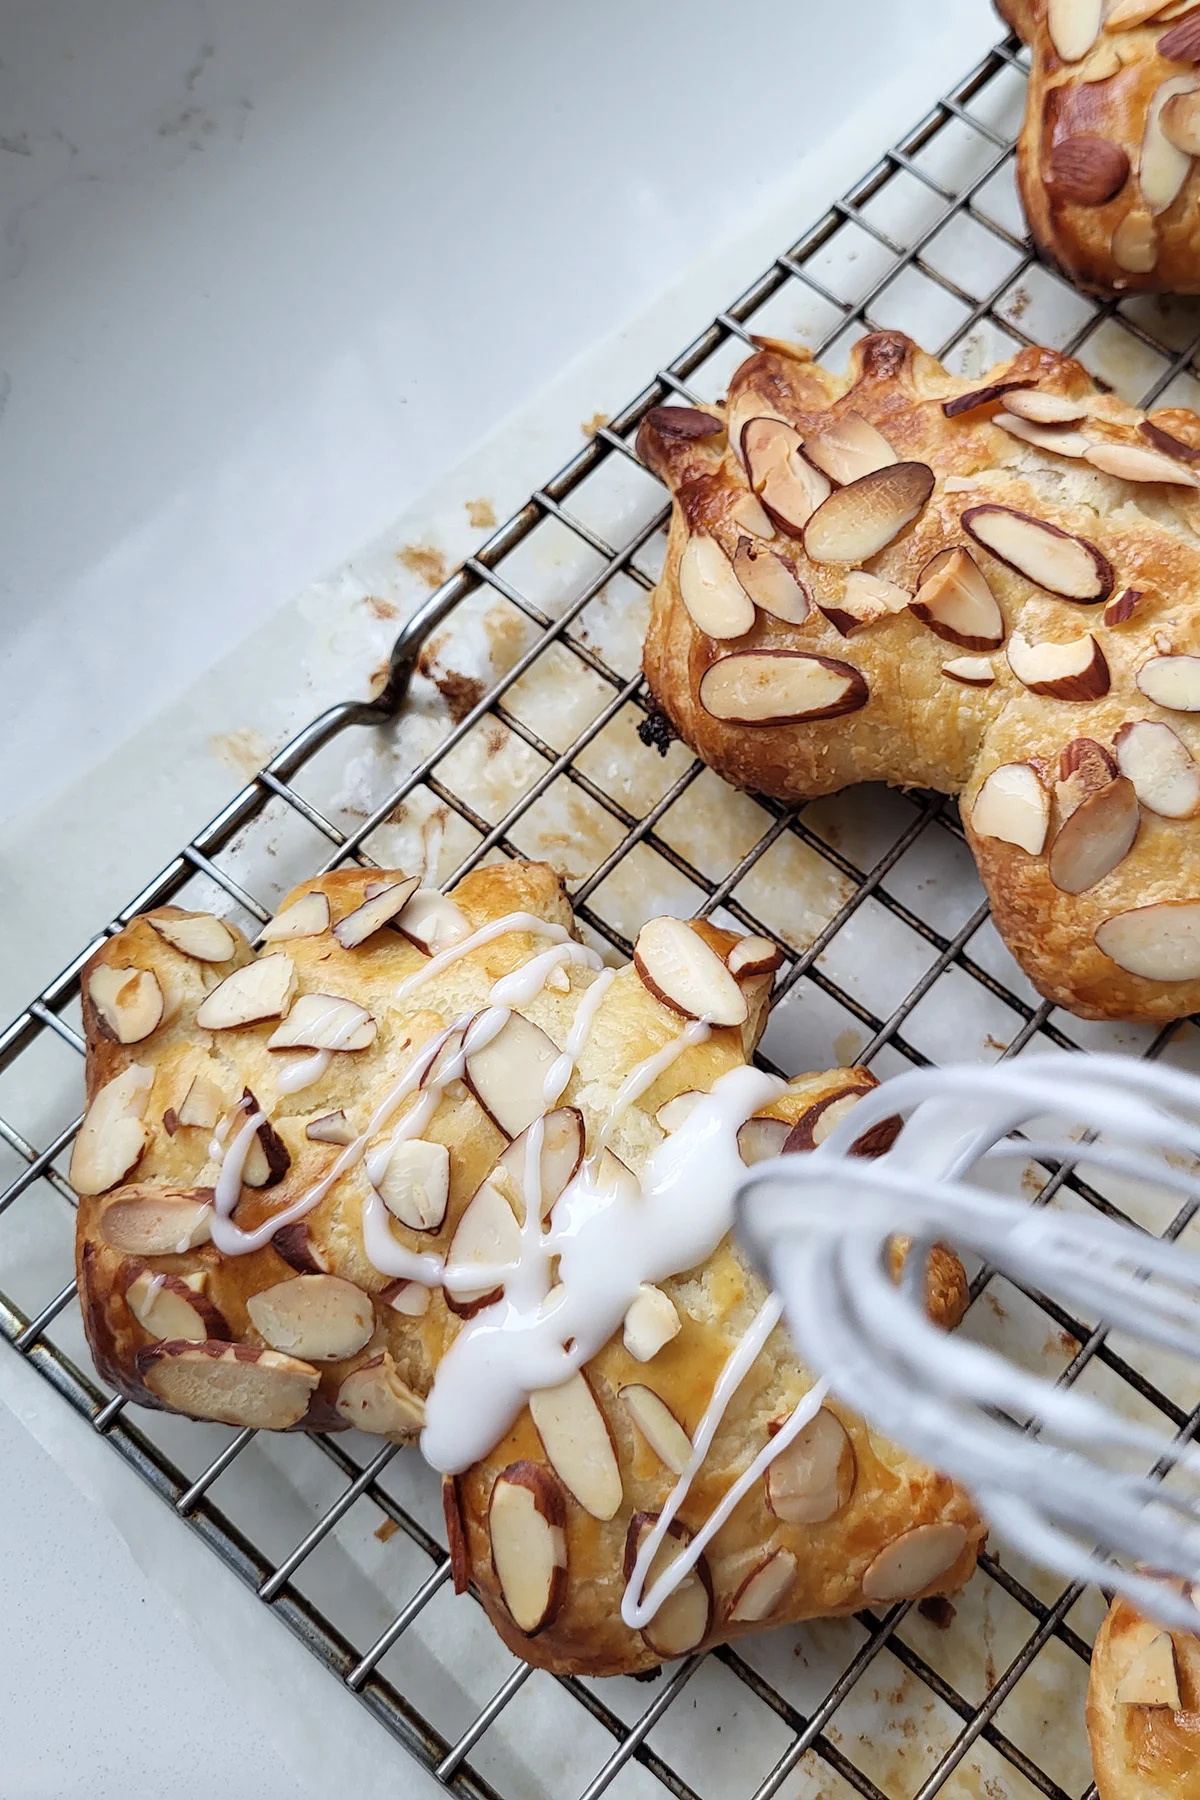 icing being drizzled on a bear claw pastry.